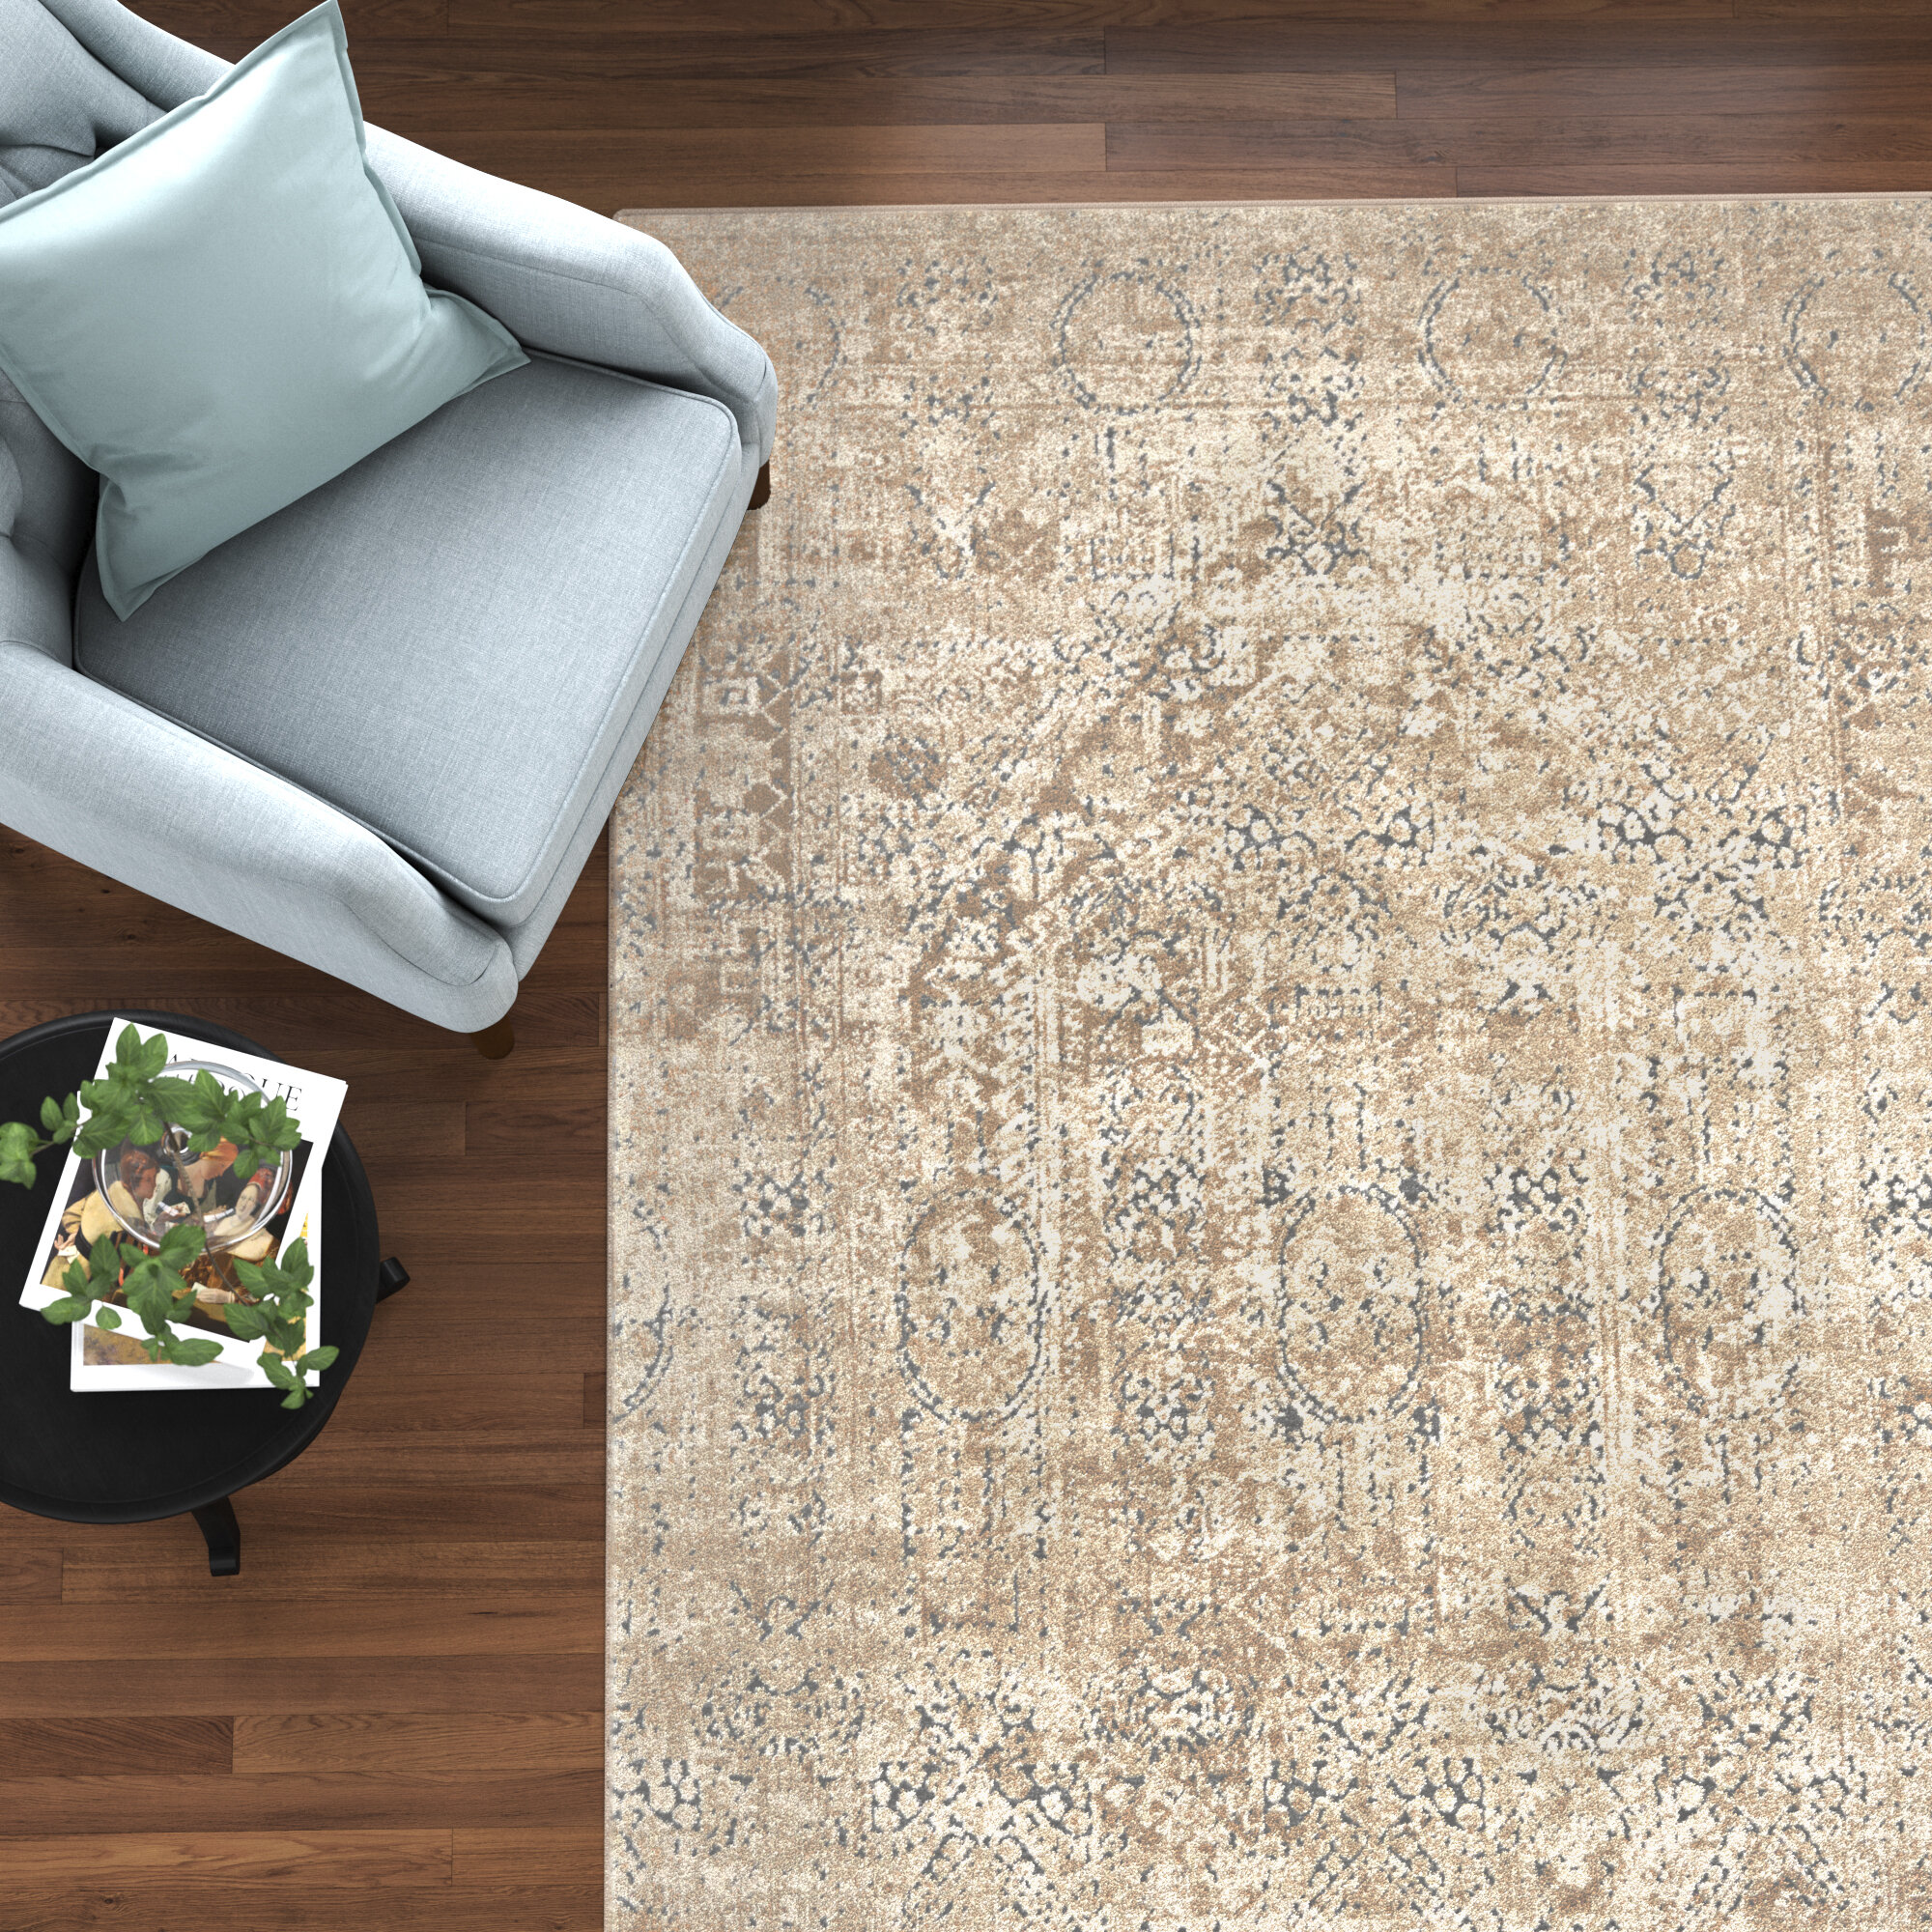 Soft Beige Area Rug Available in 75 Different Sizes